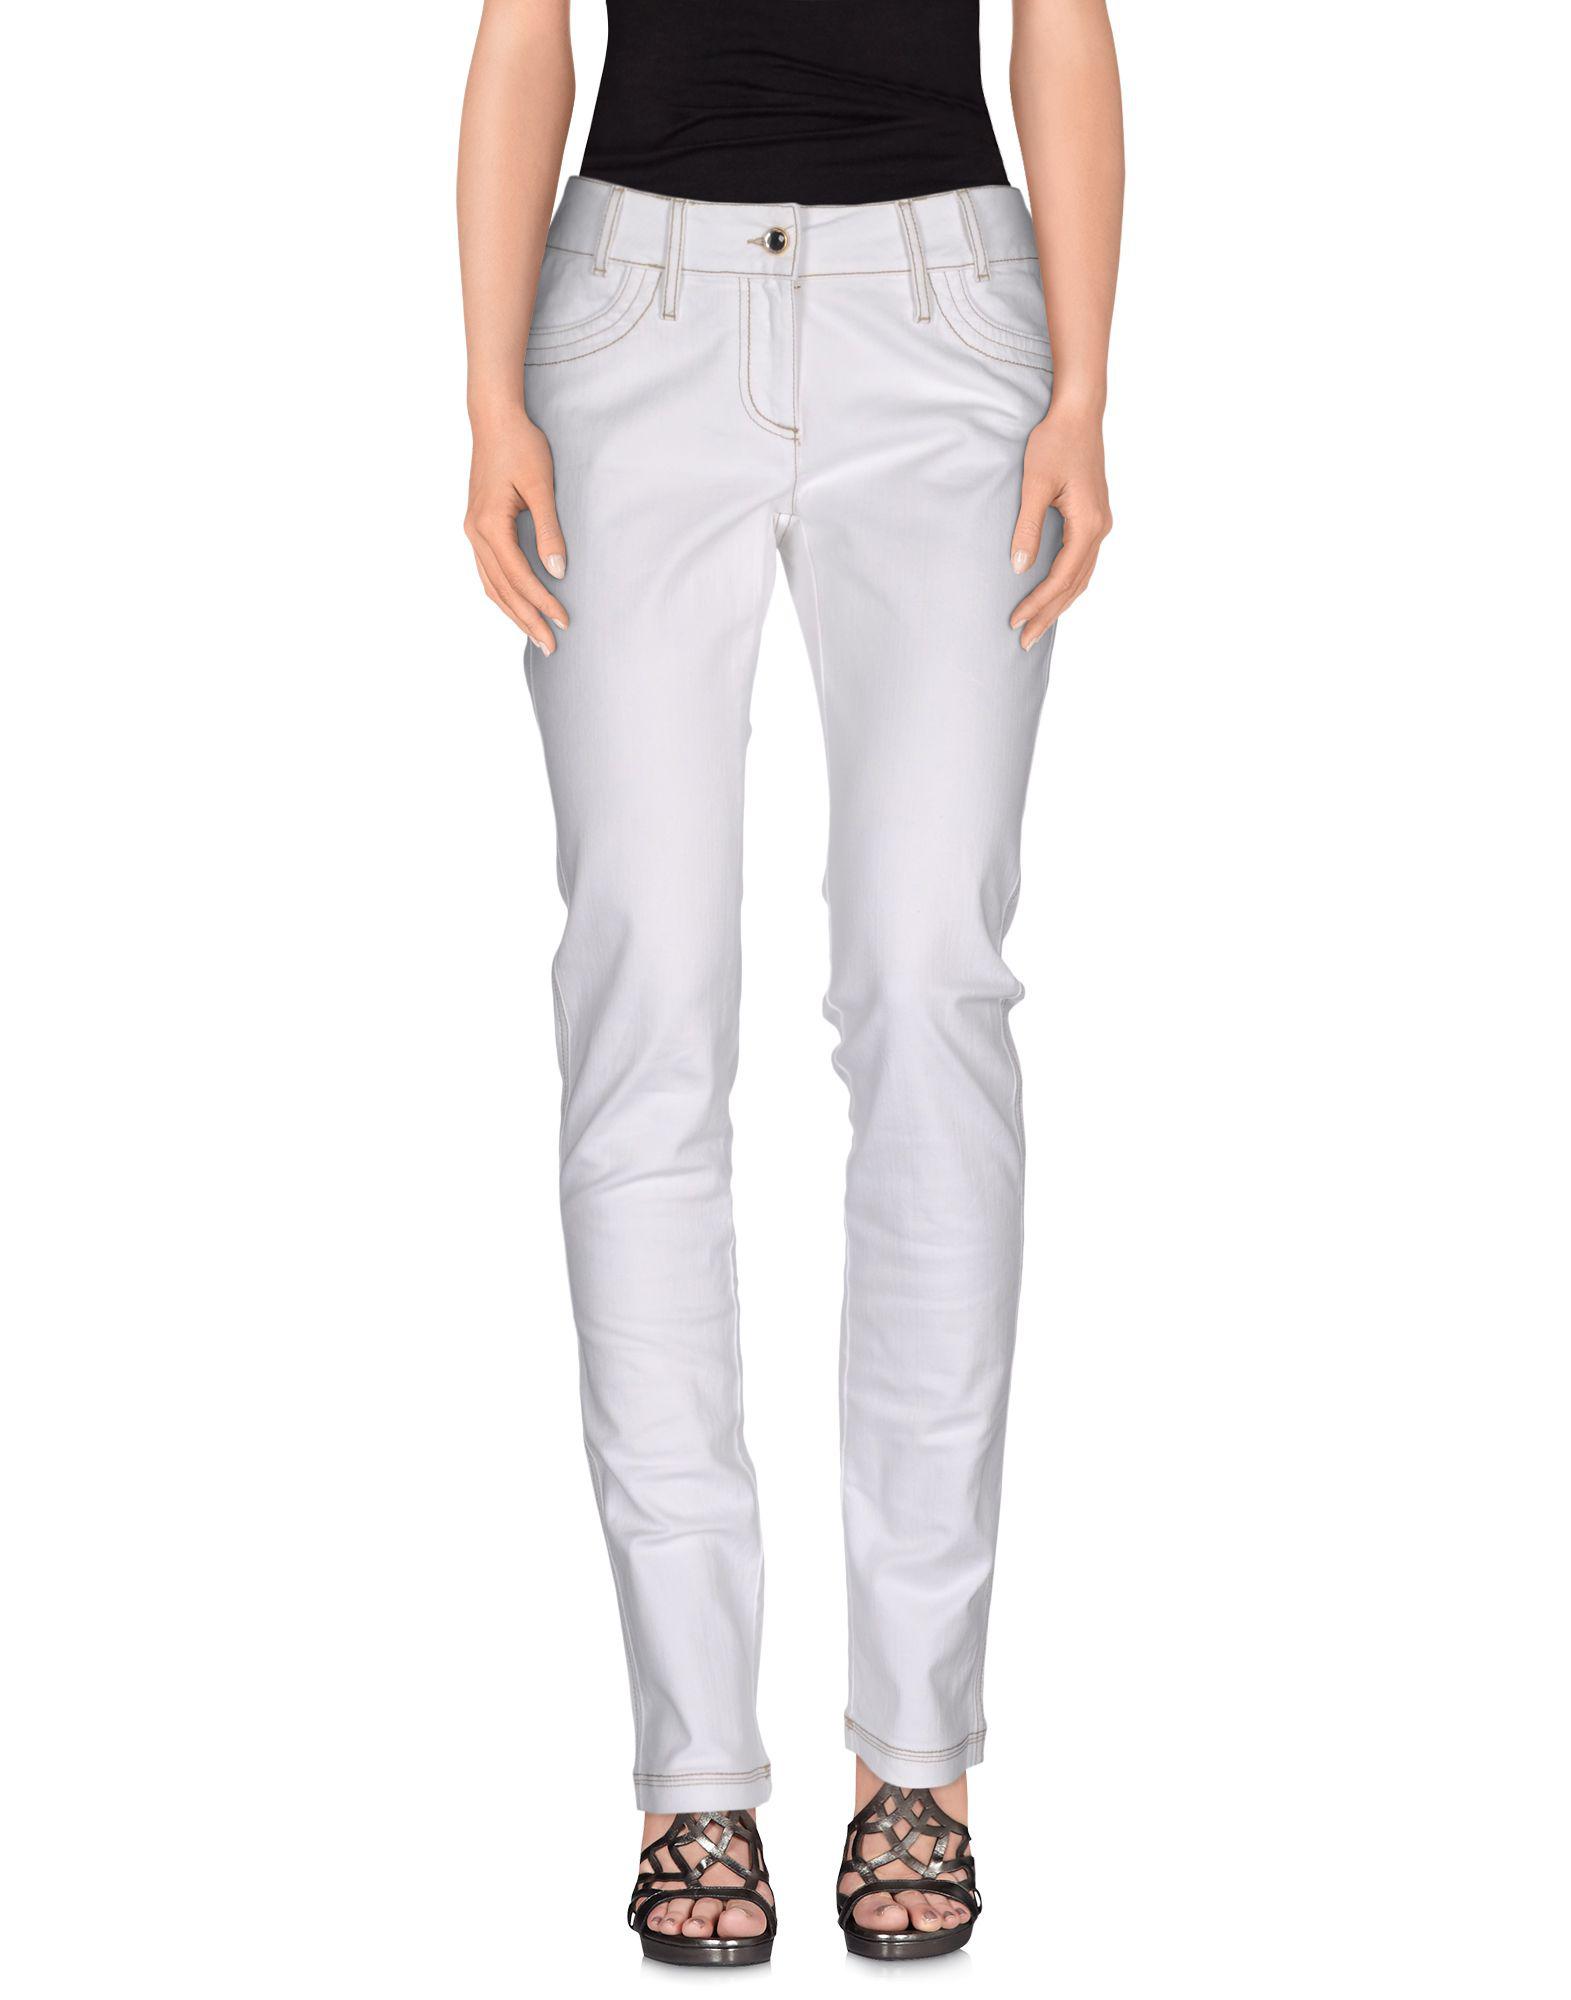 Guess Denim Pants in White - Lyst